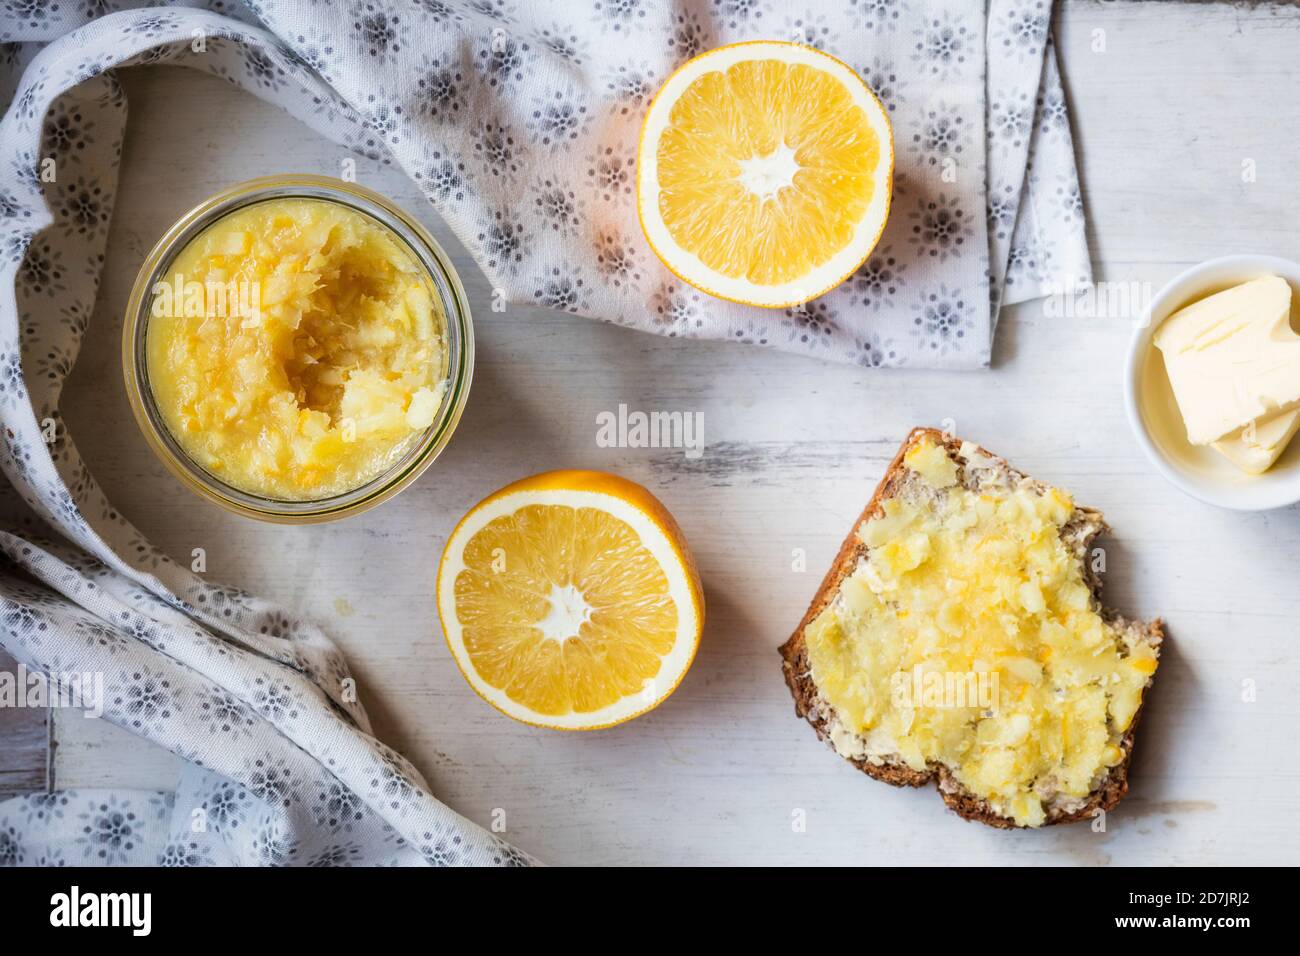 Orange slice and homemade jam kept with bread and butter on table Stock Photo